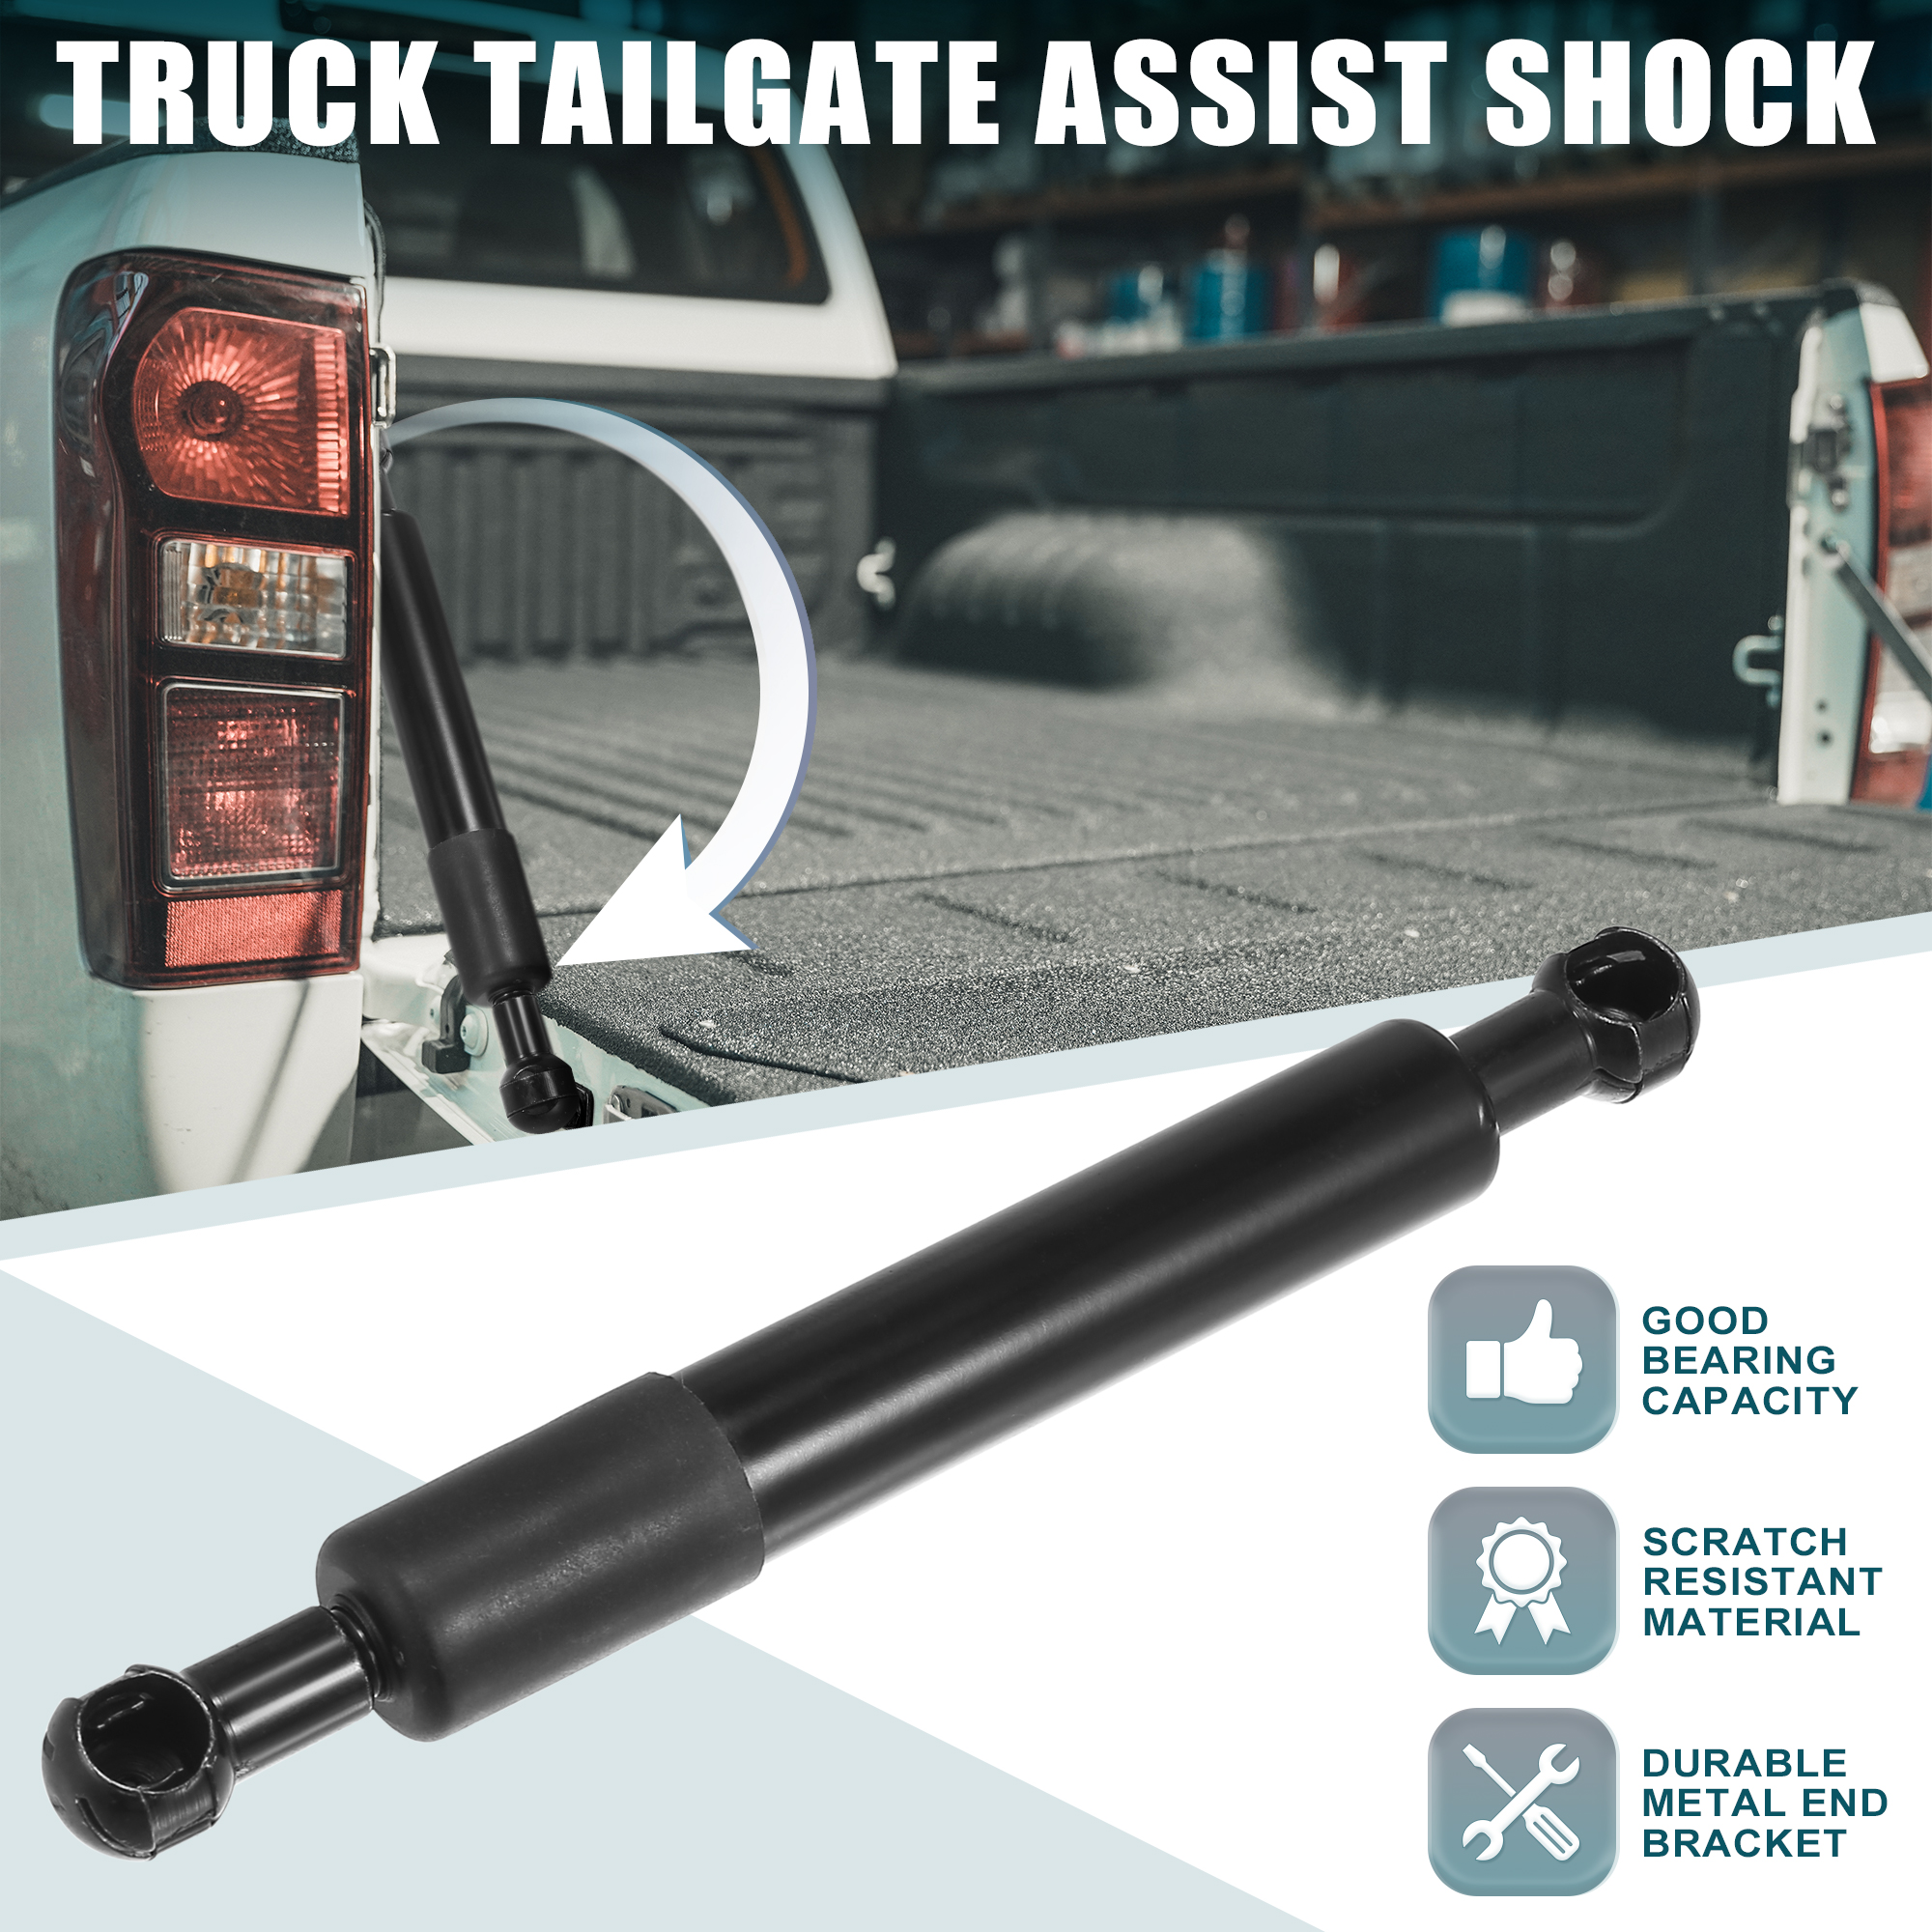 Unique Bargains Truck Tailgate Assist Shock Tailgate Lift Support for Chevy Silverado 1500 2500